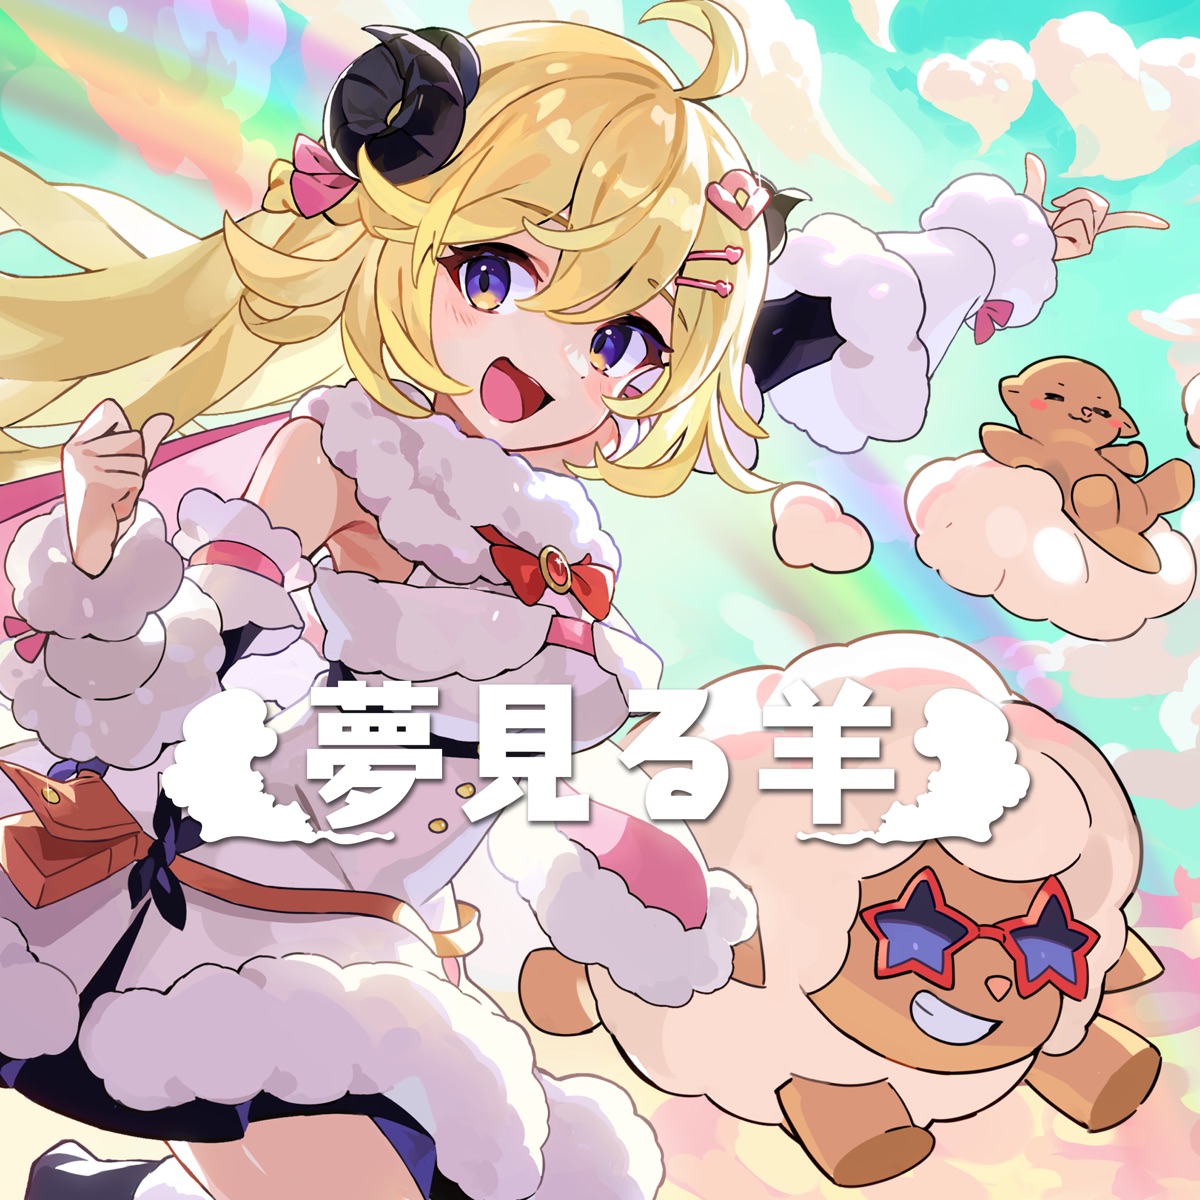 Cover art for『Tsunomaki Watame - Dreamy Sheep』from the release『Dreamy Sheep』